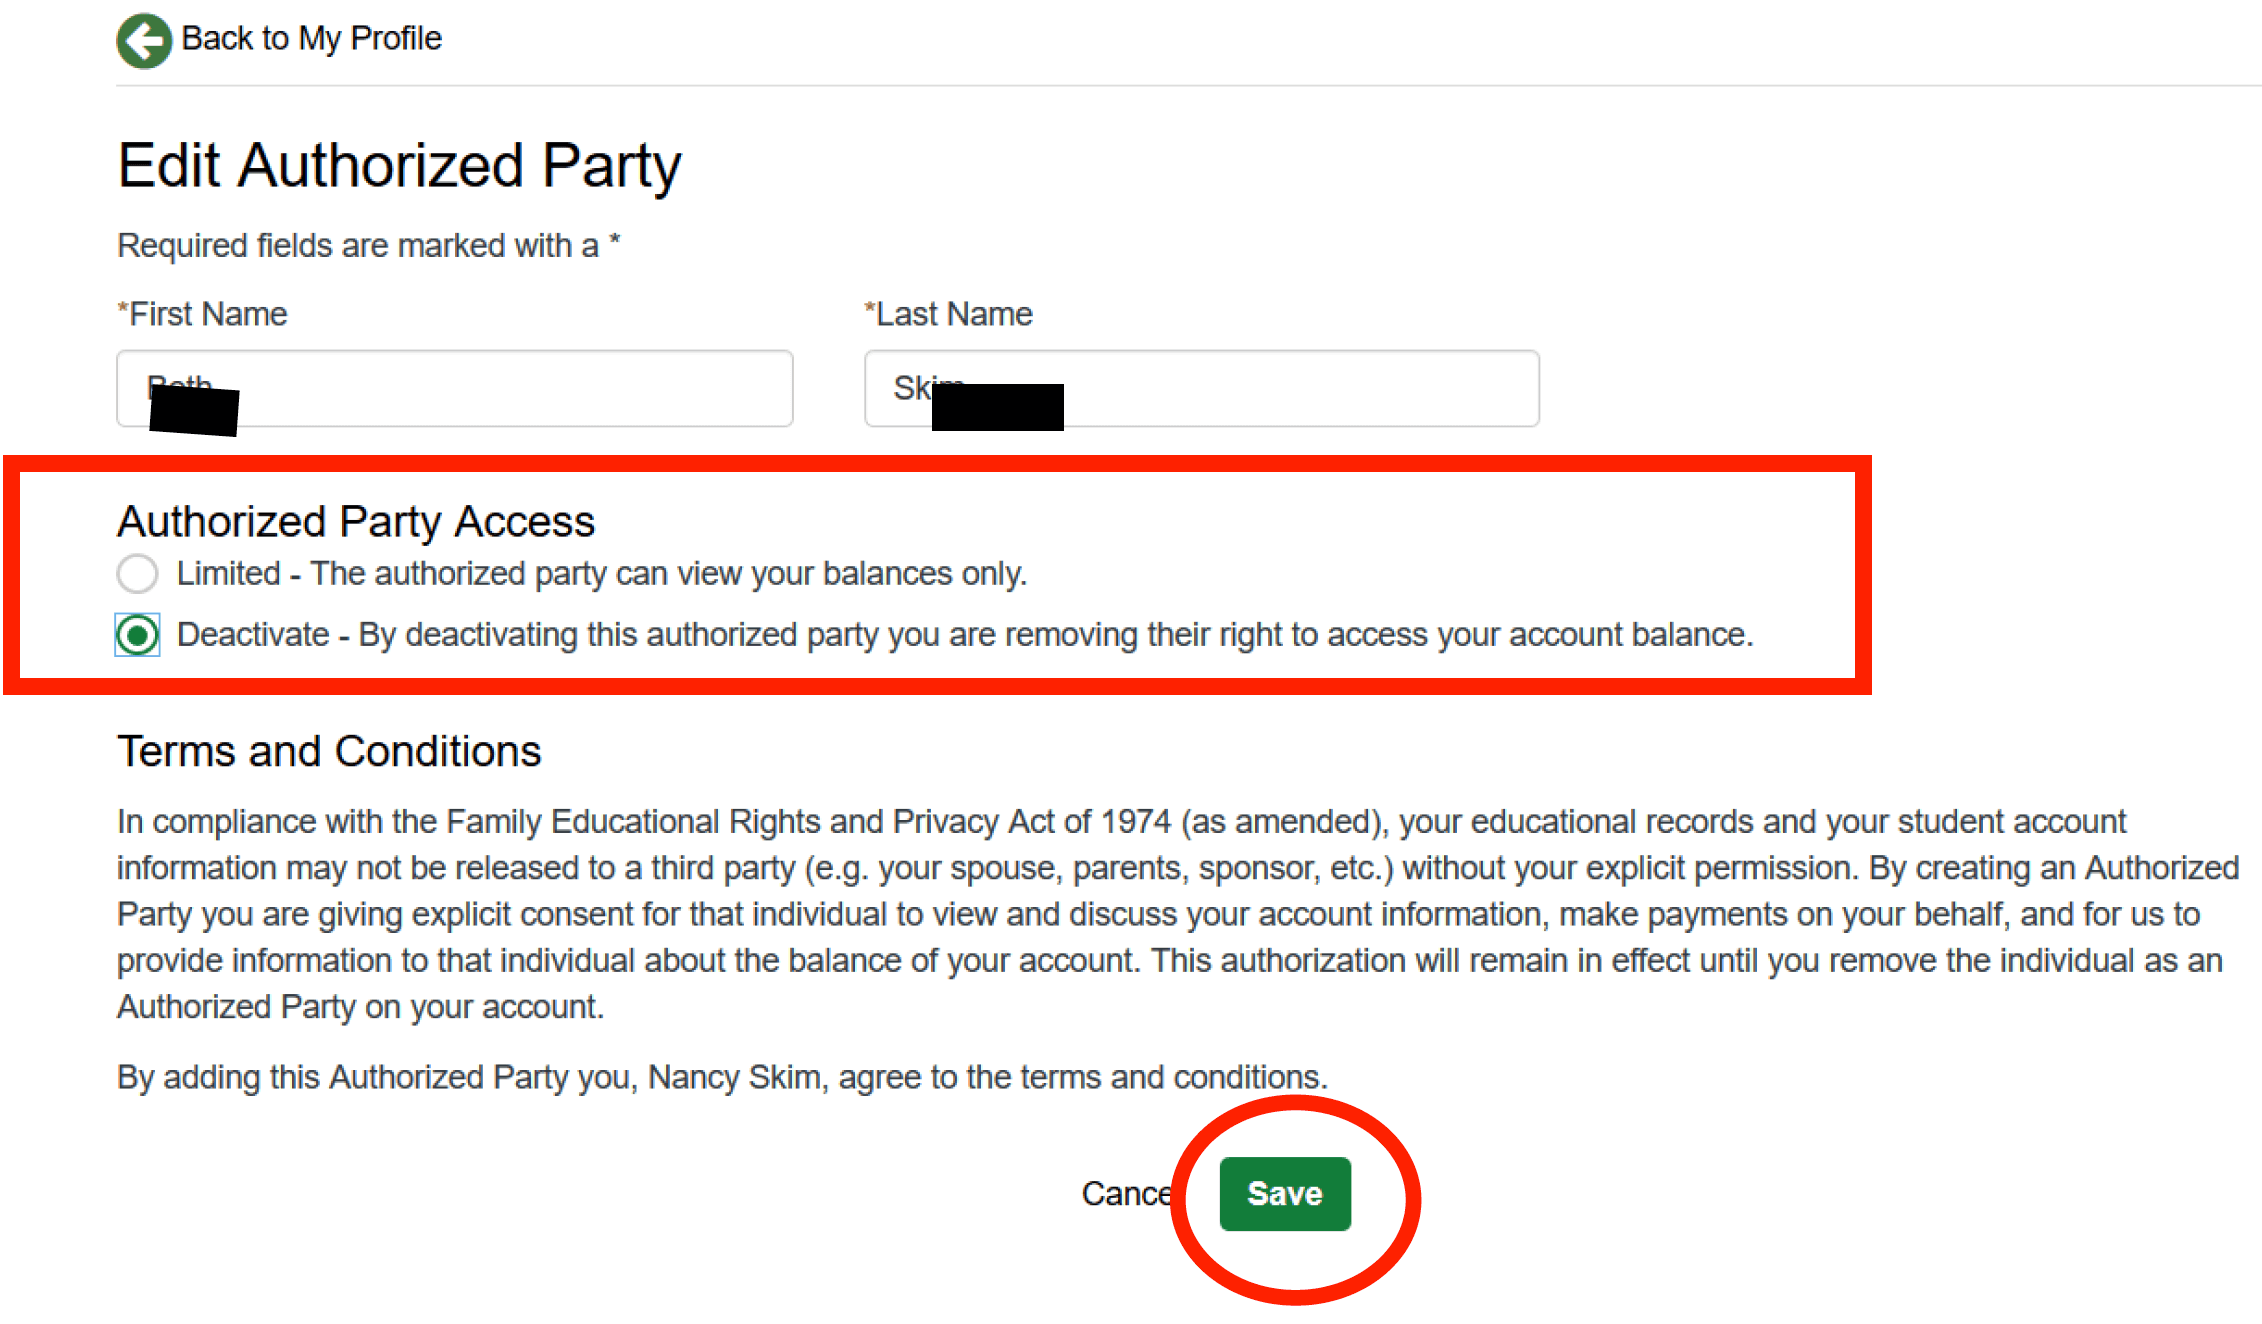 Edit Authorized Party screenwtih the limited and deactivate radio buttons circled. The save button is also circled.